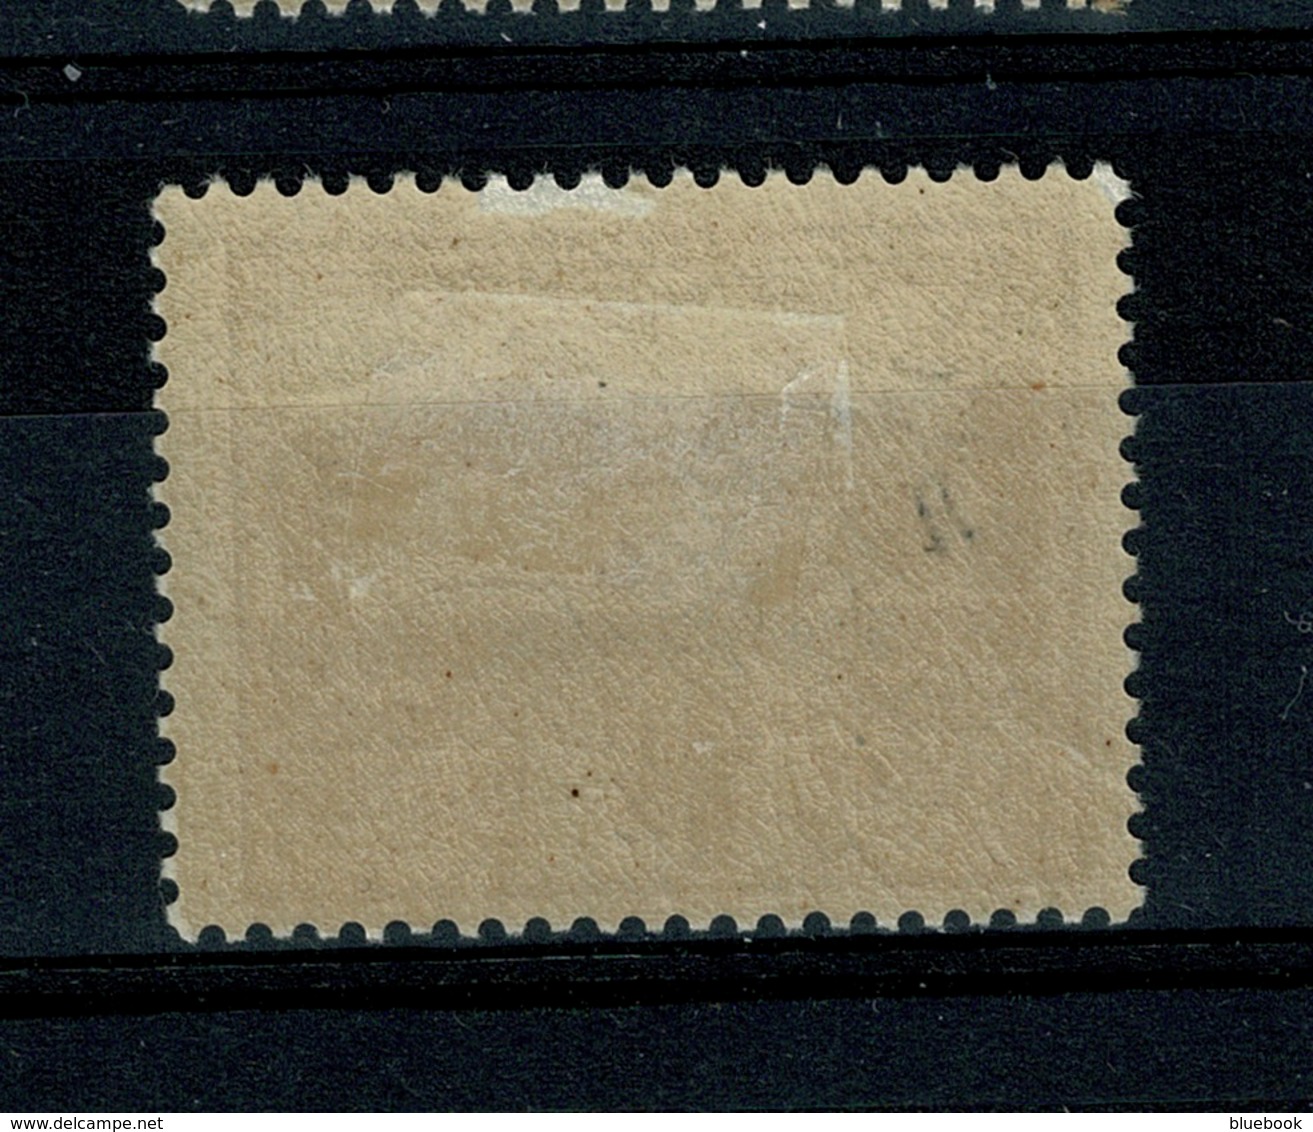 Ref 1354 - WWII Channel Islands - Jersey 1943 SG 5 - 1 1/2d Mint Stamp - Jersey